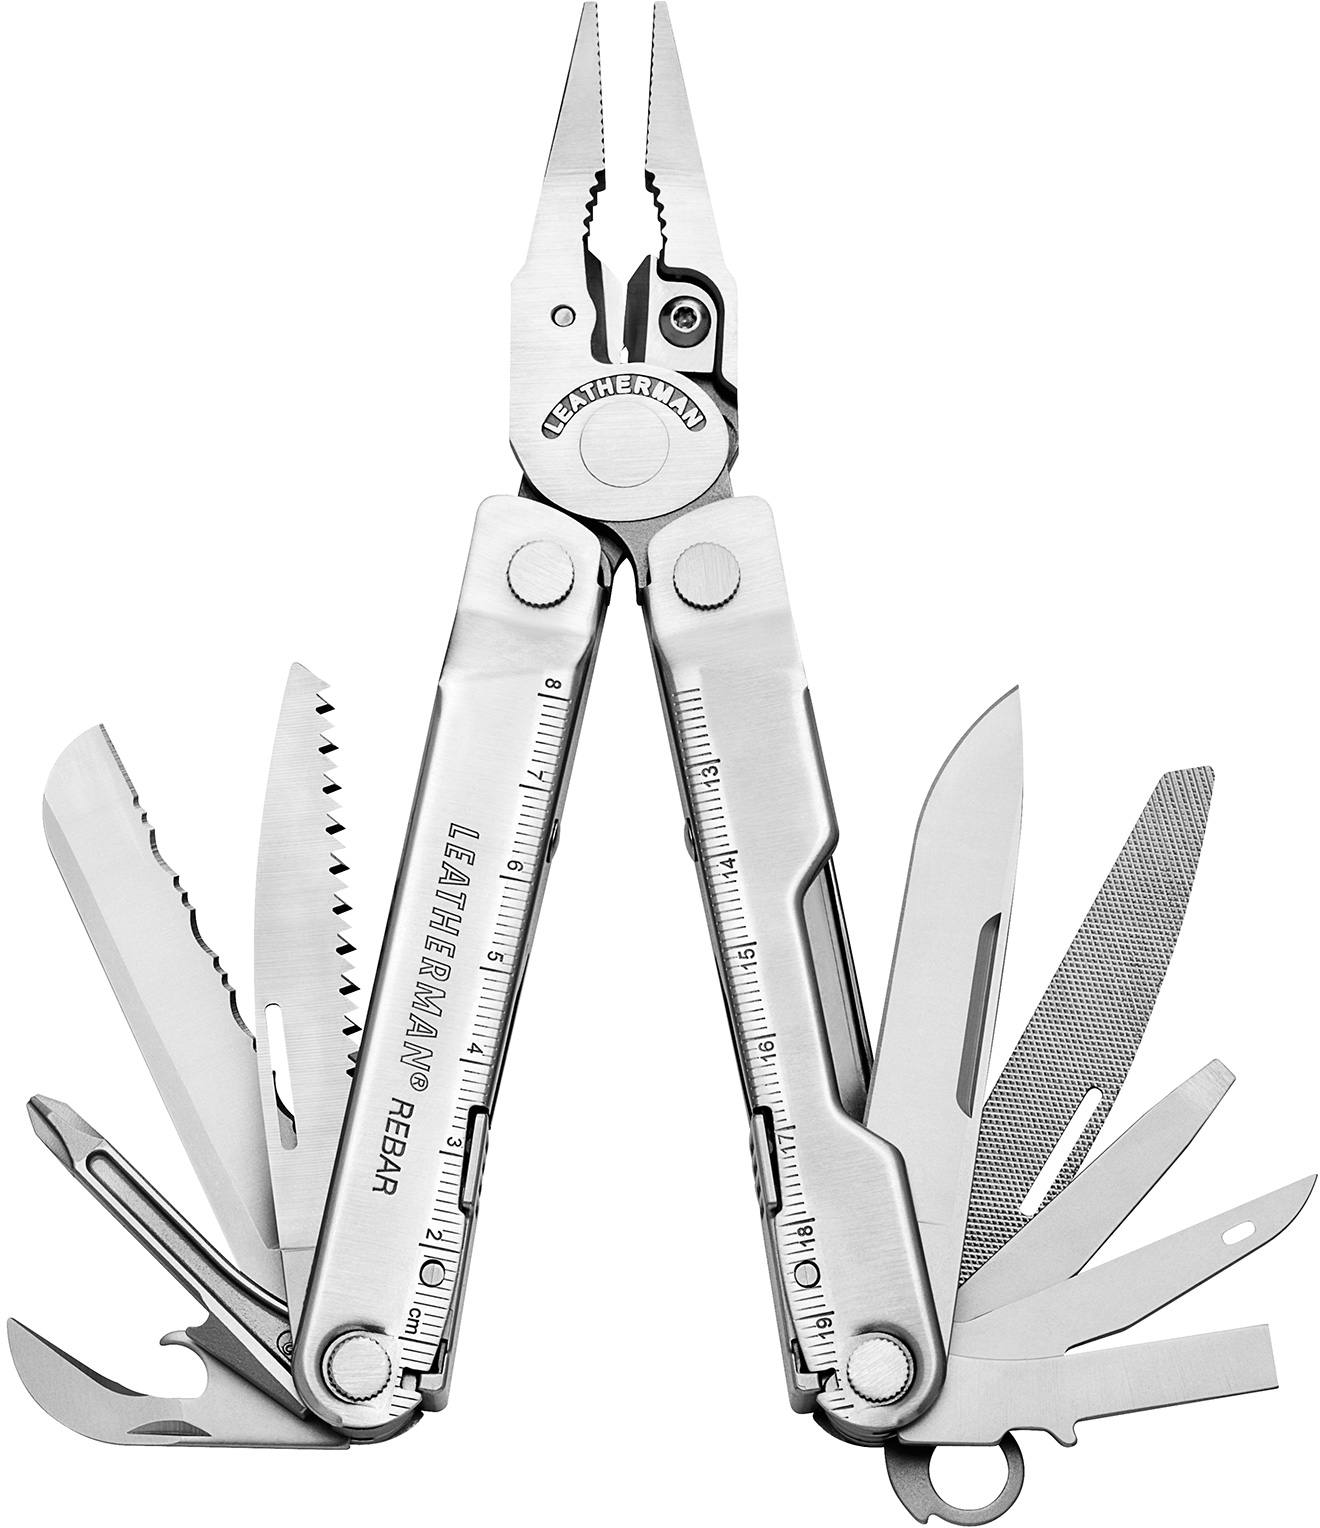 Leatherman Rebar with leather pouch